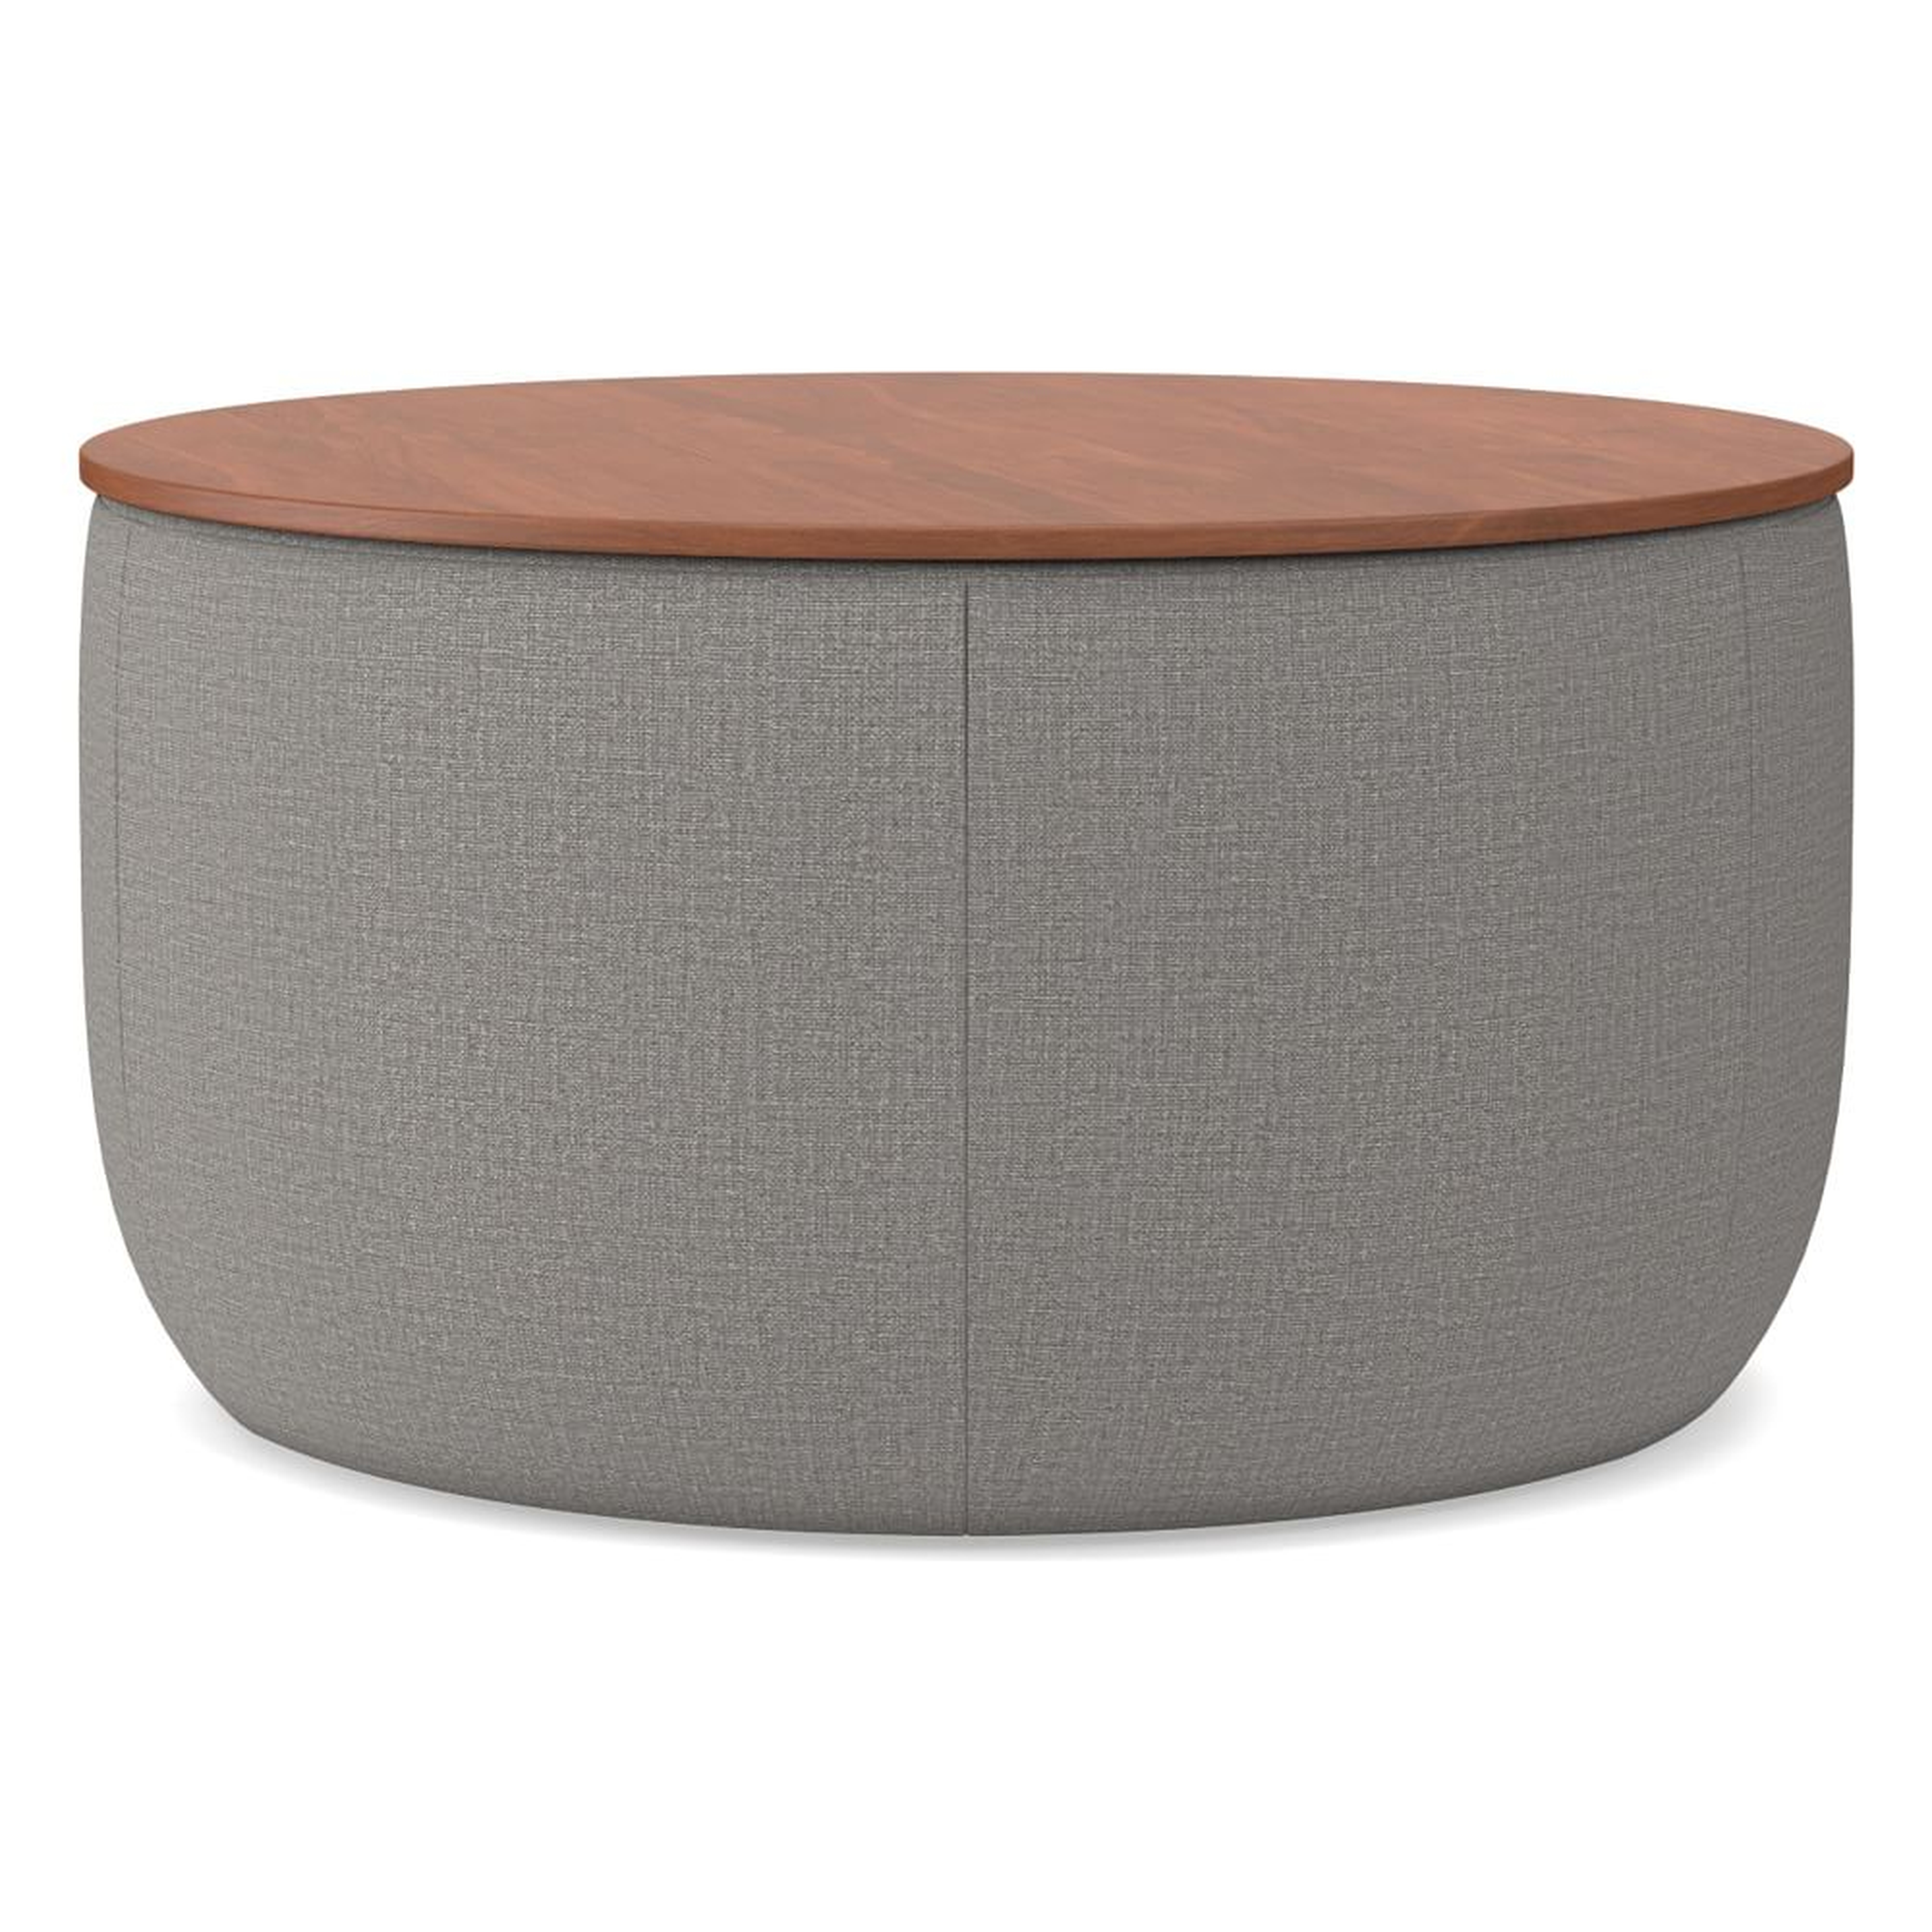 Upholstered Storage Base Ottoman - Large, Poly, Yarn Dyed Linen Weave, Pearl Gray, Dark Mineral - West Elm